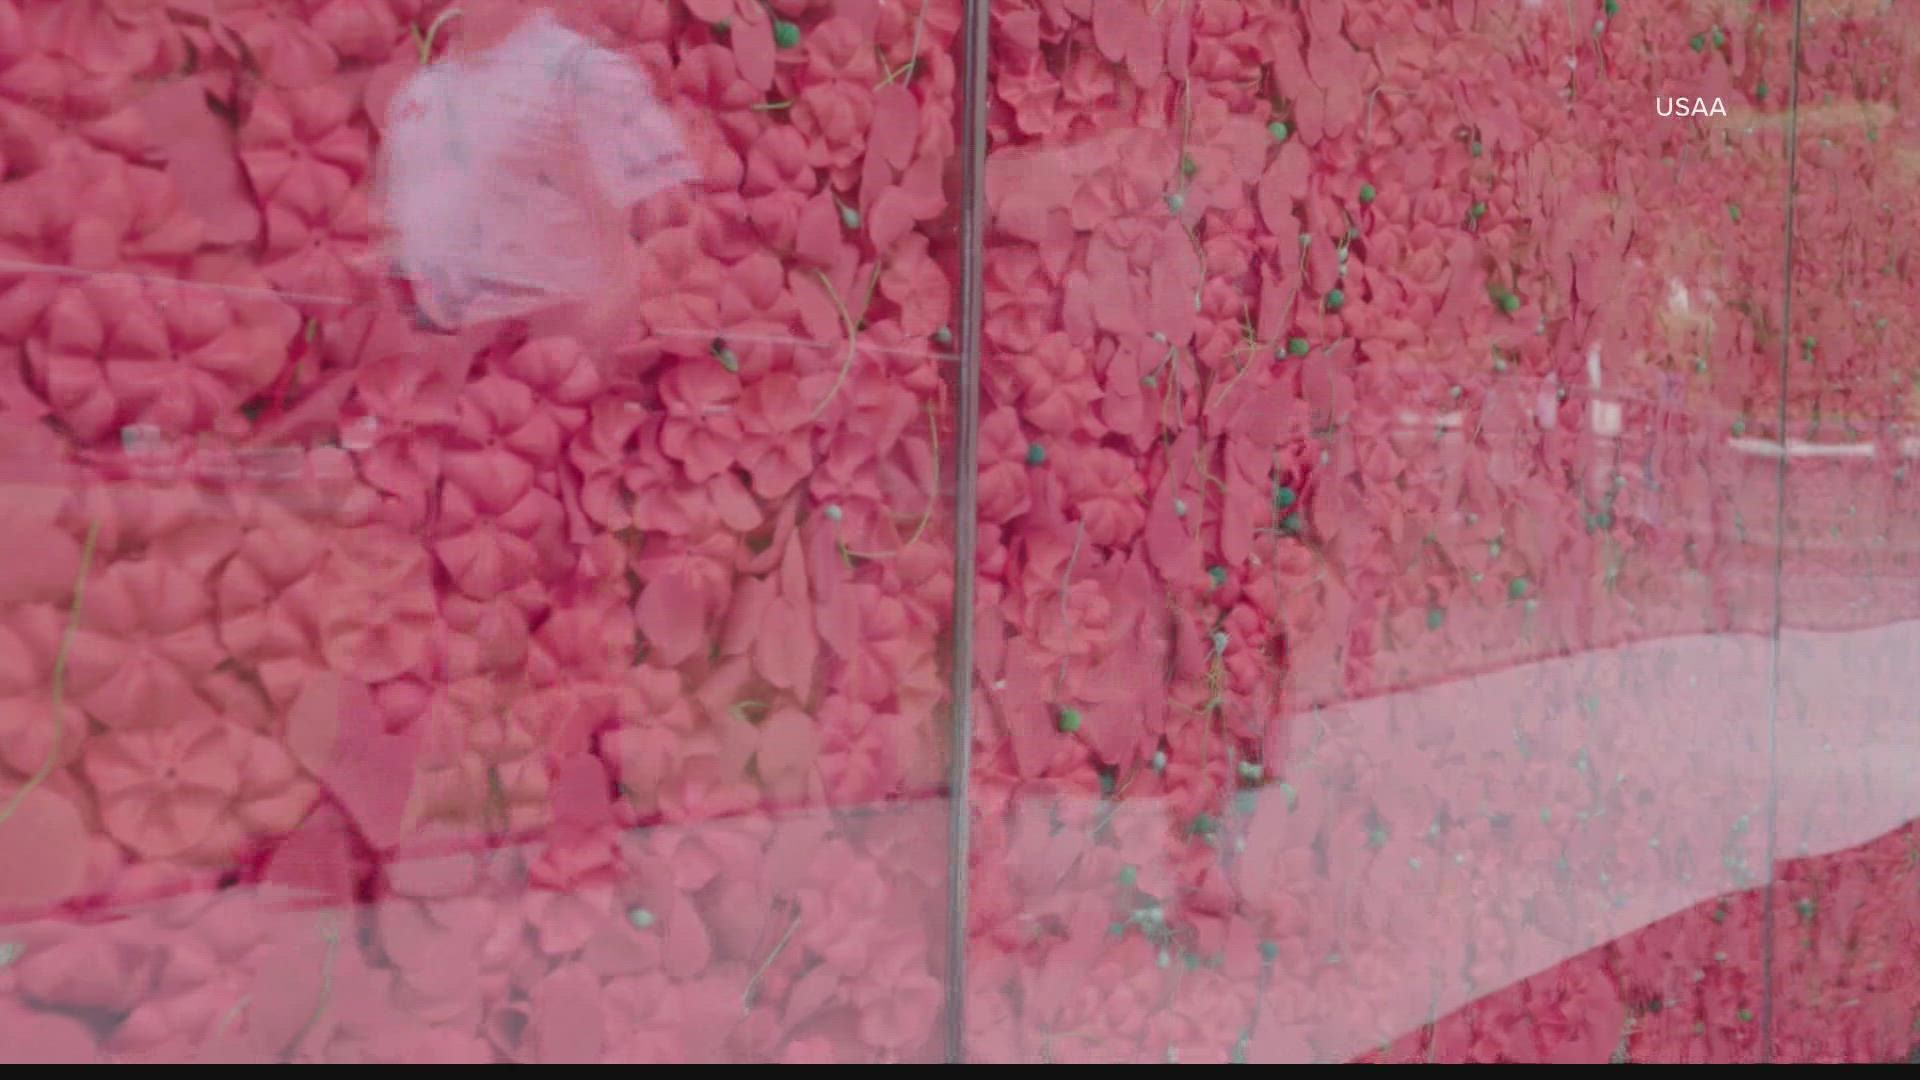 645,000 red poppies encased in this wall in DC. Do you know why?